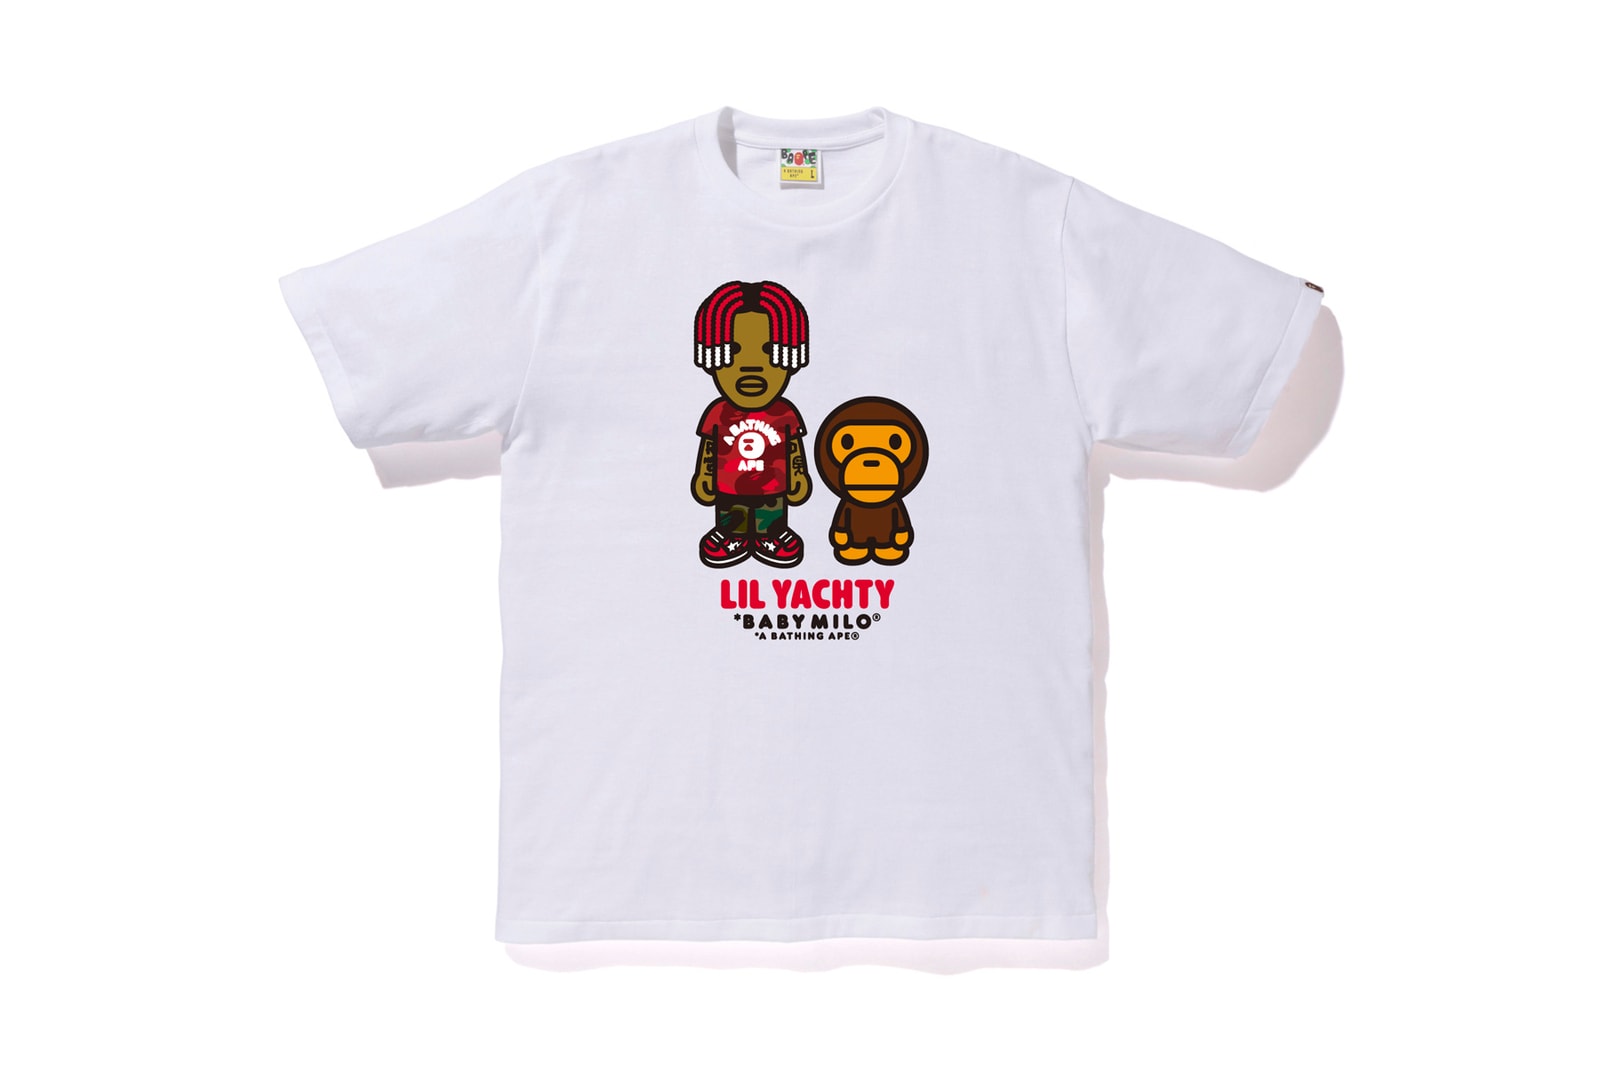 Lil Yachty x BAPE SS19 Collection a bathing ape spring summer 2019 lookbooks bape heads show concerts mankey baby milo